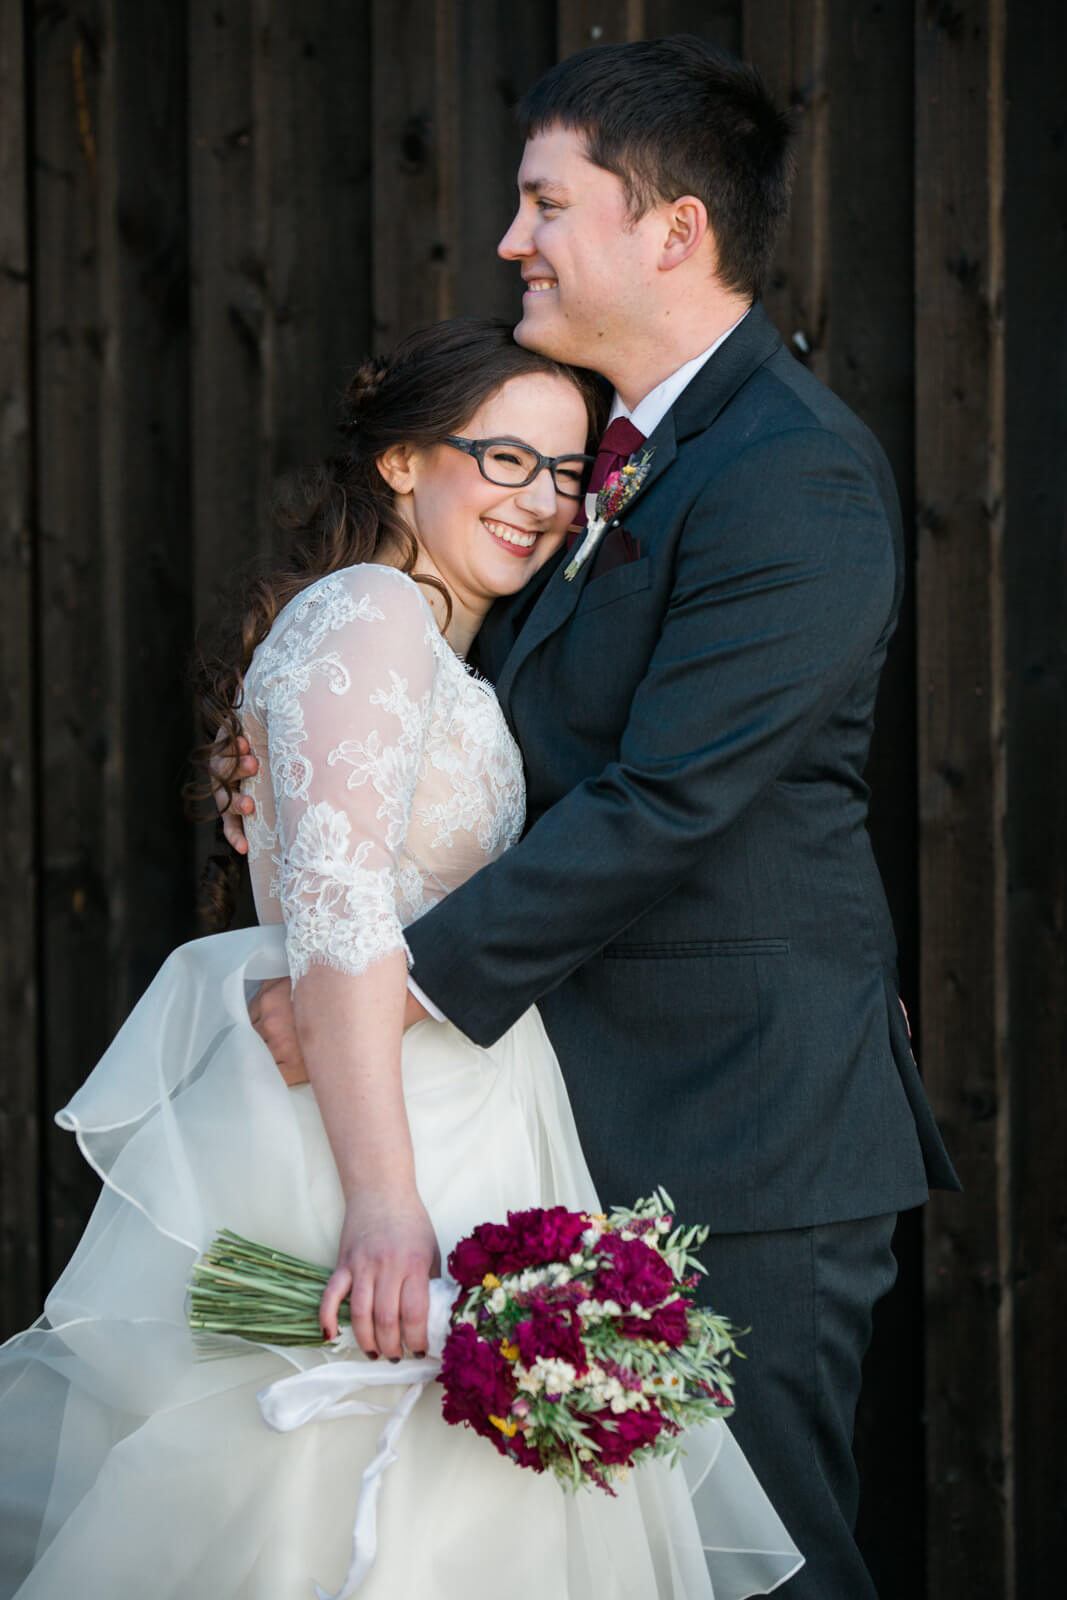 A bride and groom hug and smile during their wedding at The Barn on Mullan in Missoula Montana.